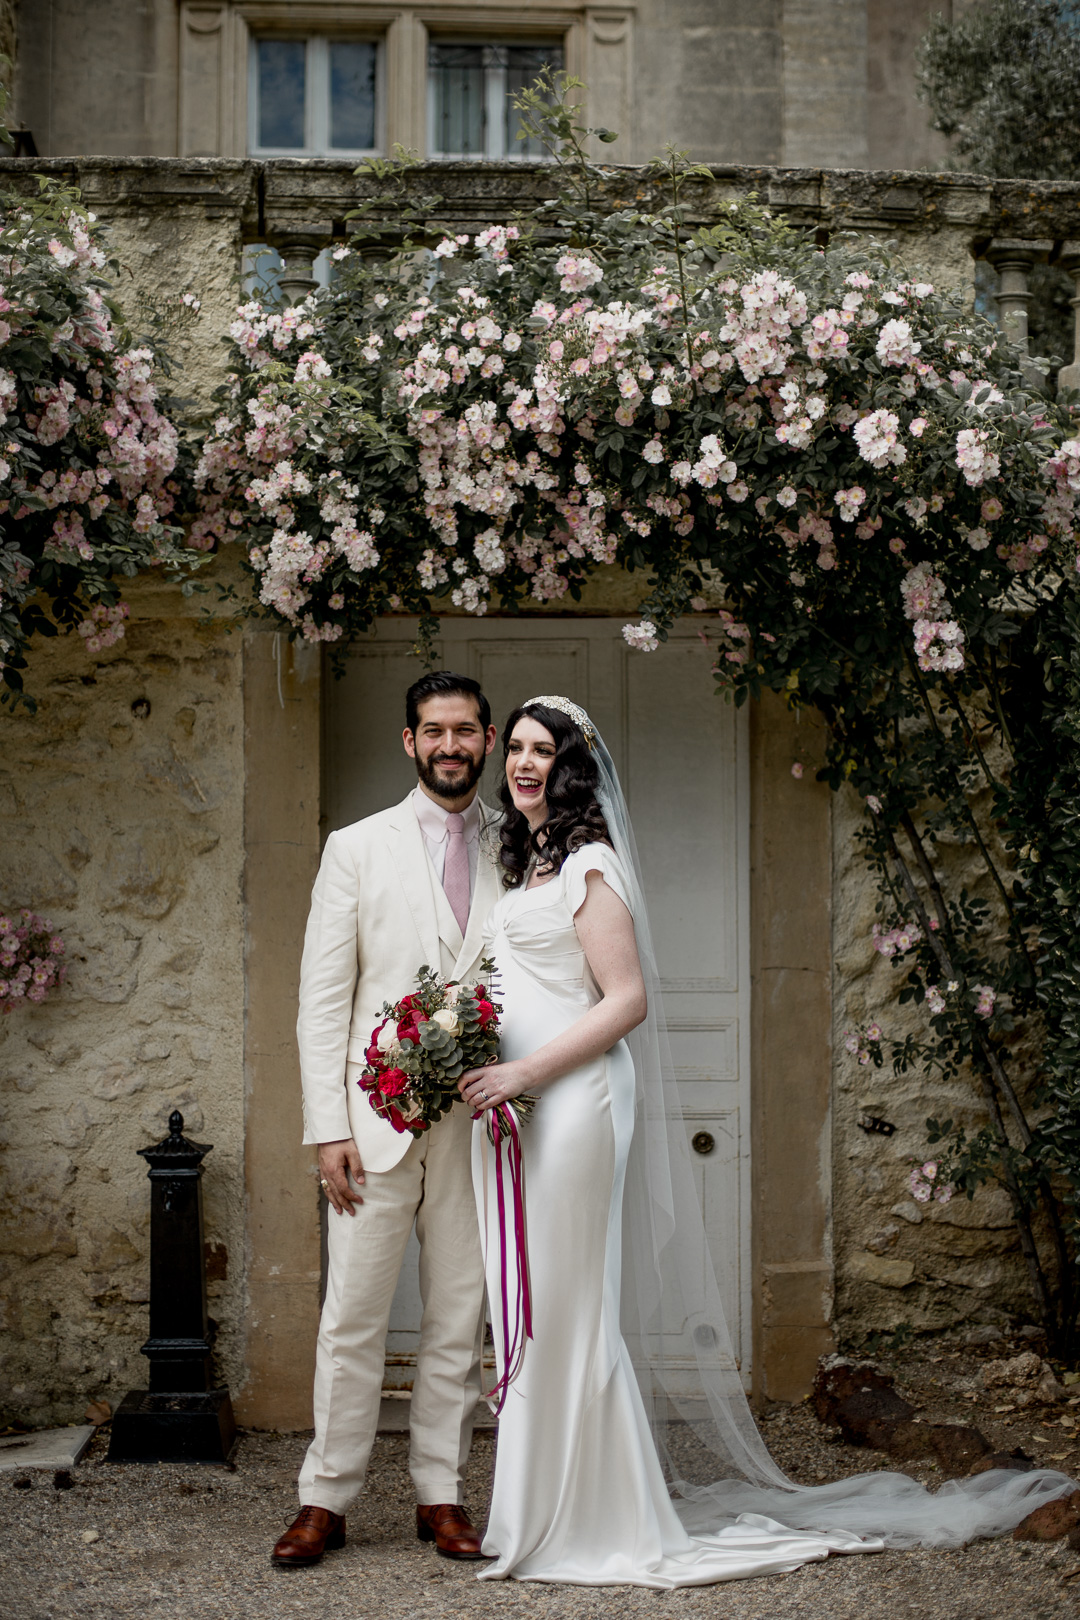 This couple went for an art deco wedding in the south of France